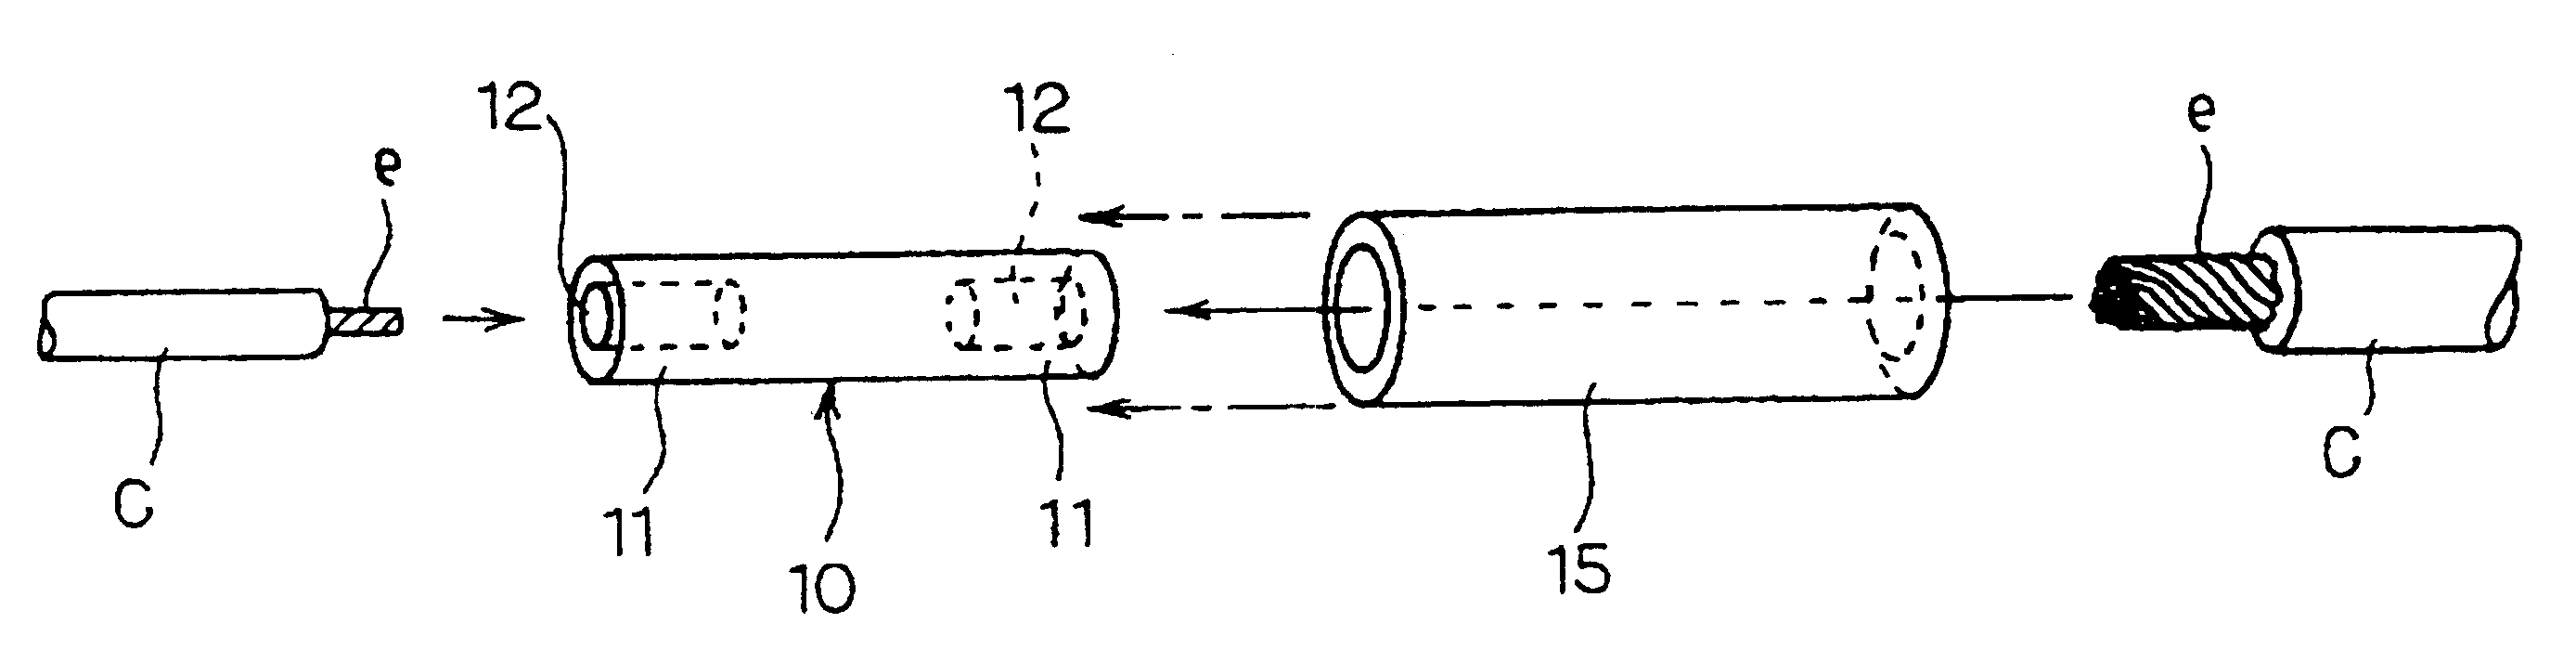 Crimping terminal for connection between electric cables